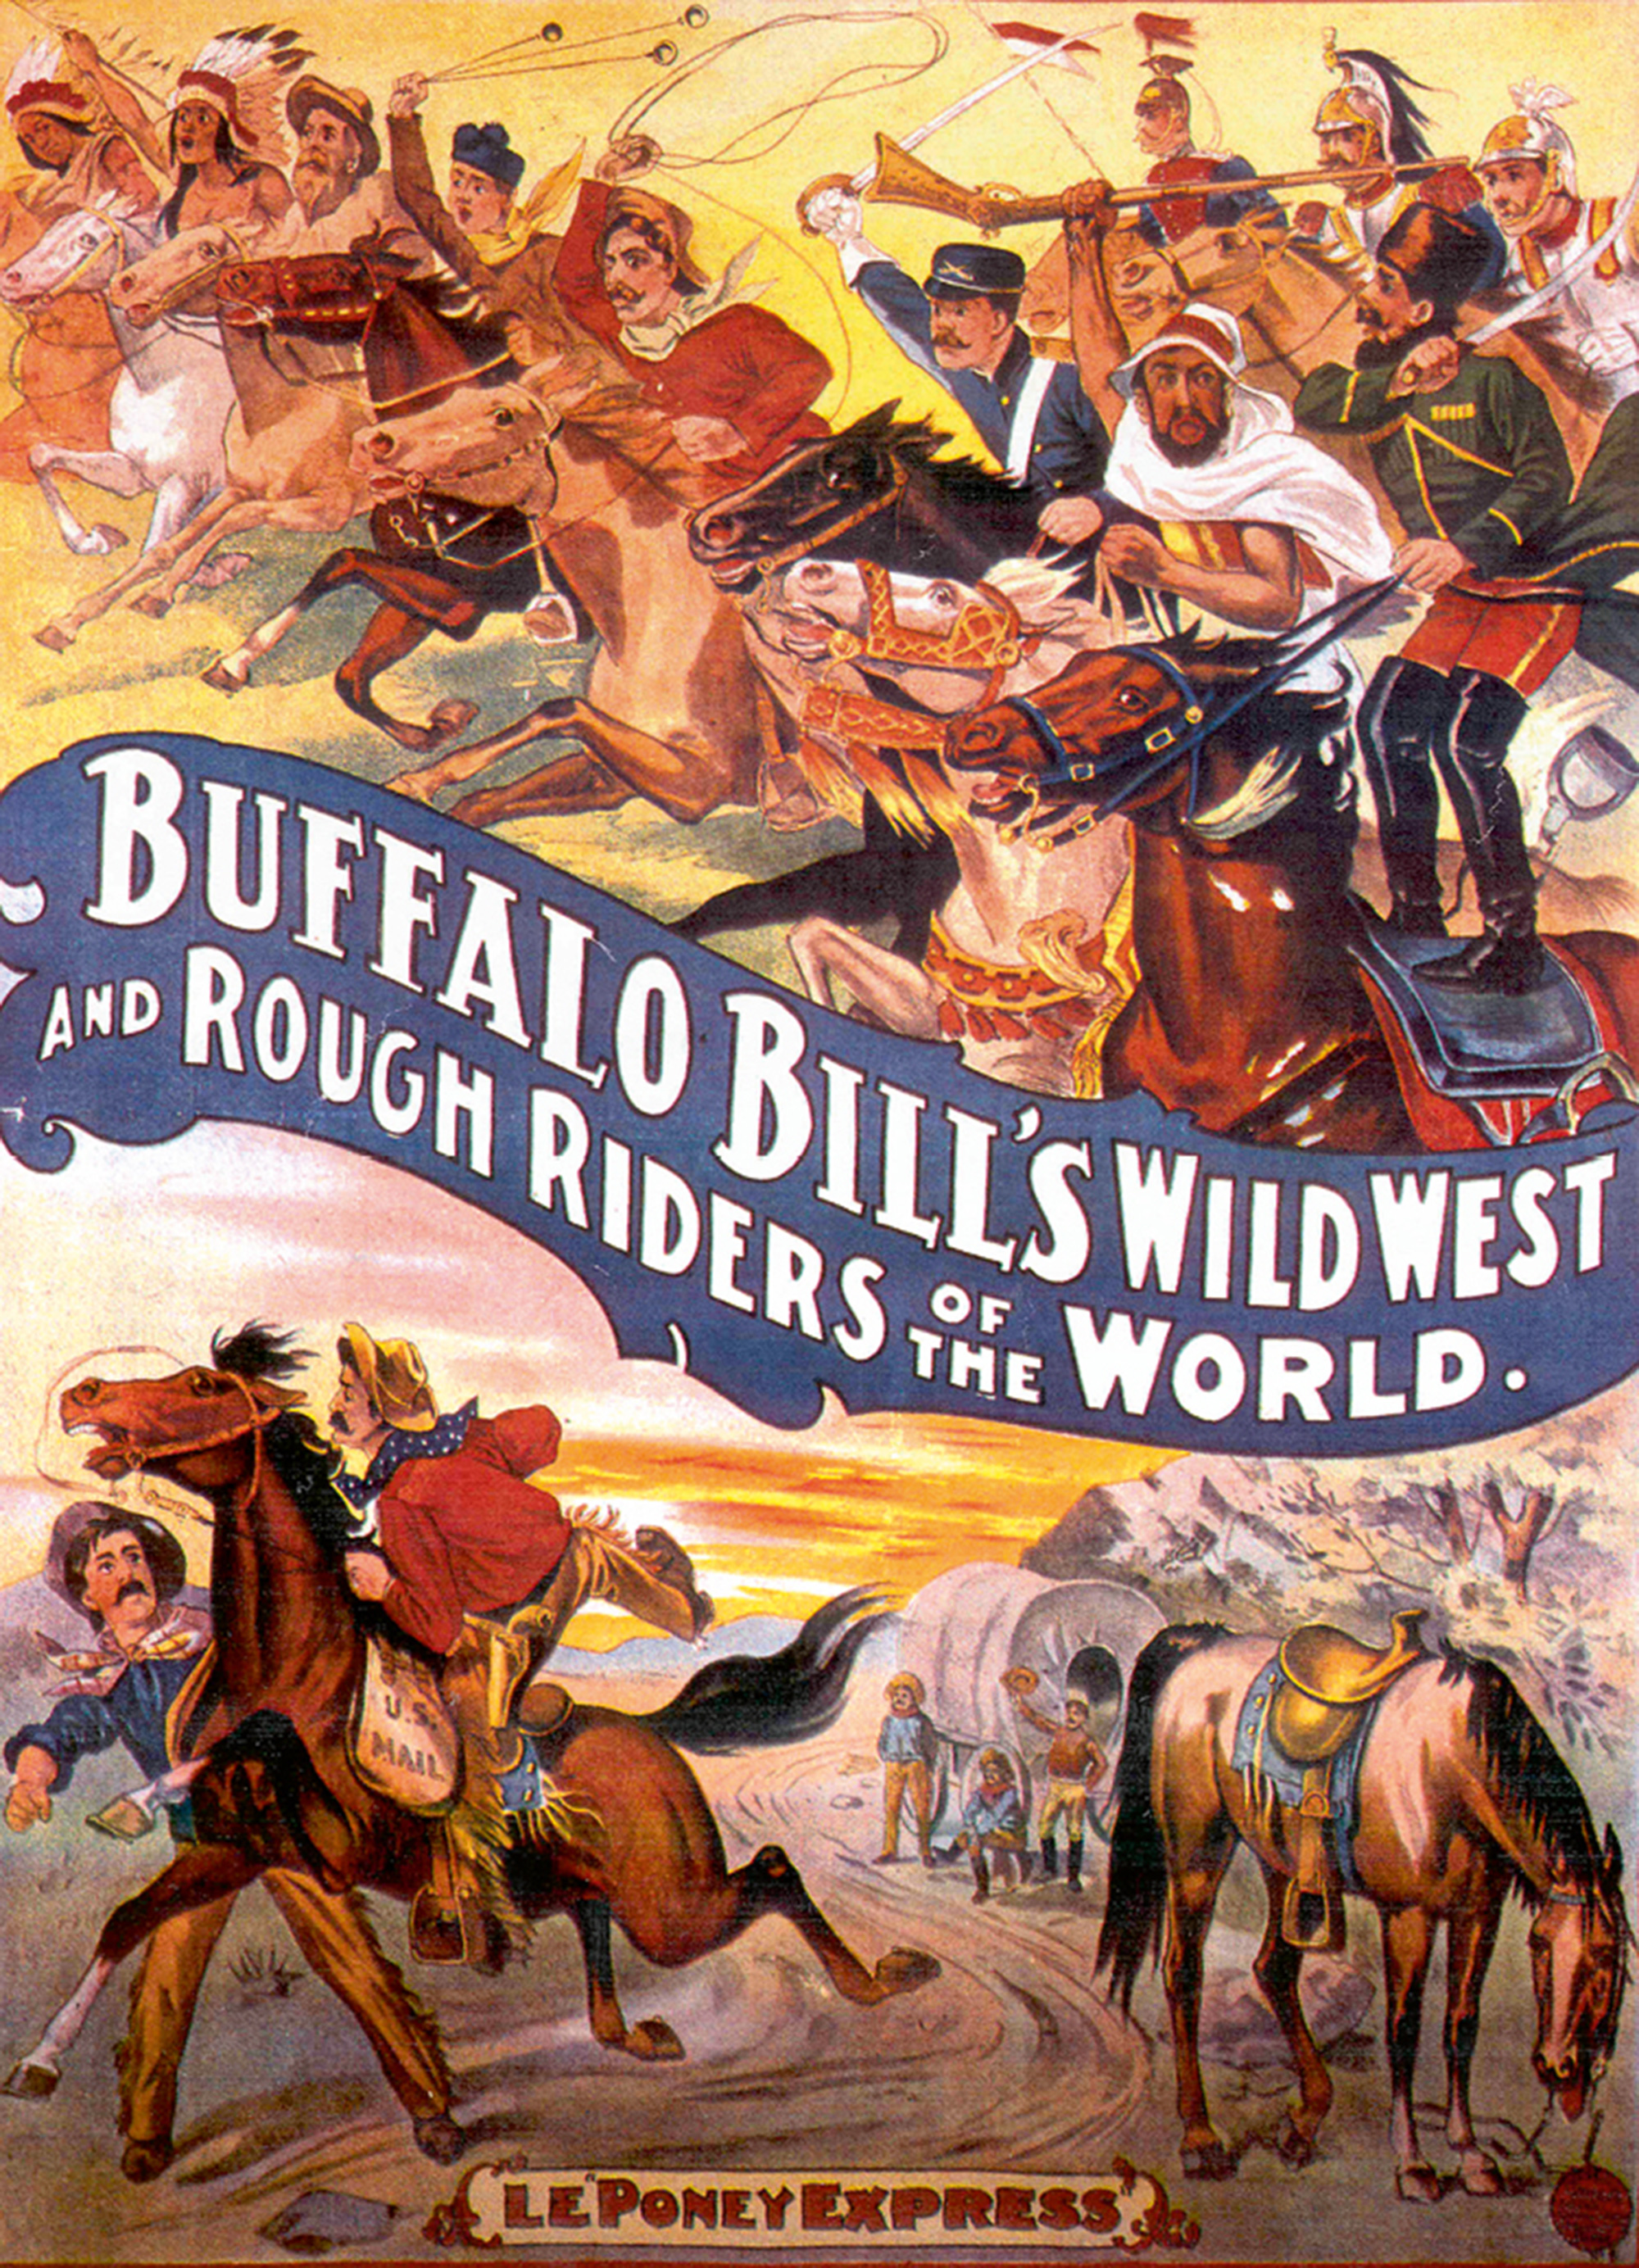 Poster using “Le Poney Express” to advertise Buffalo Bill’s Wild West show at the 1889 Paris Universal Exposition.